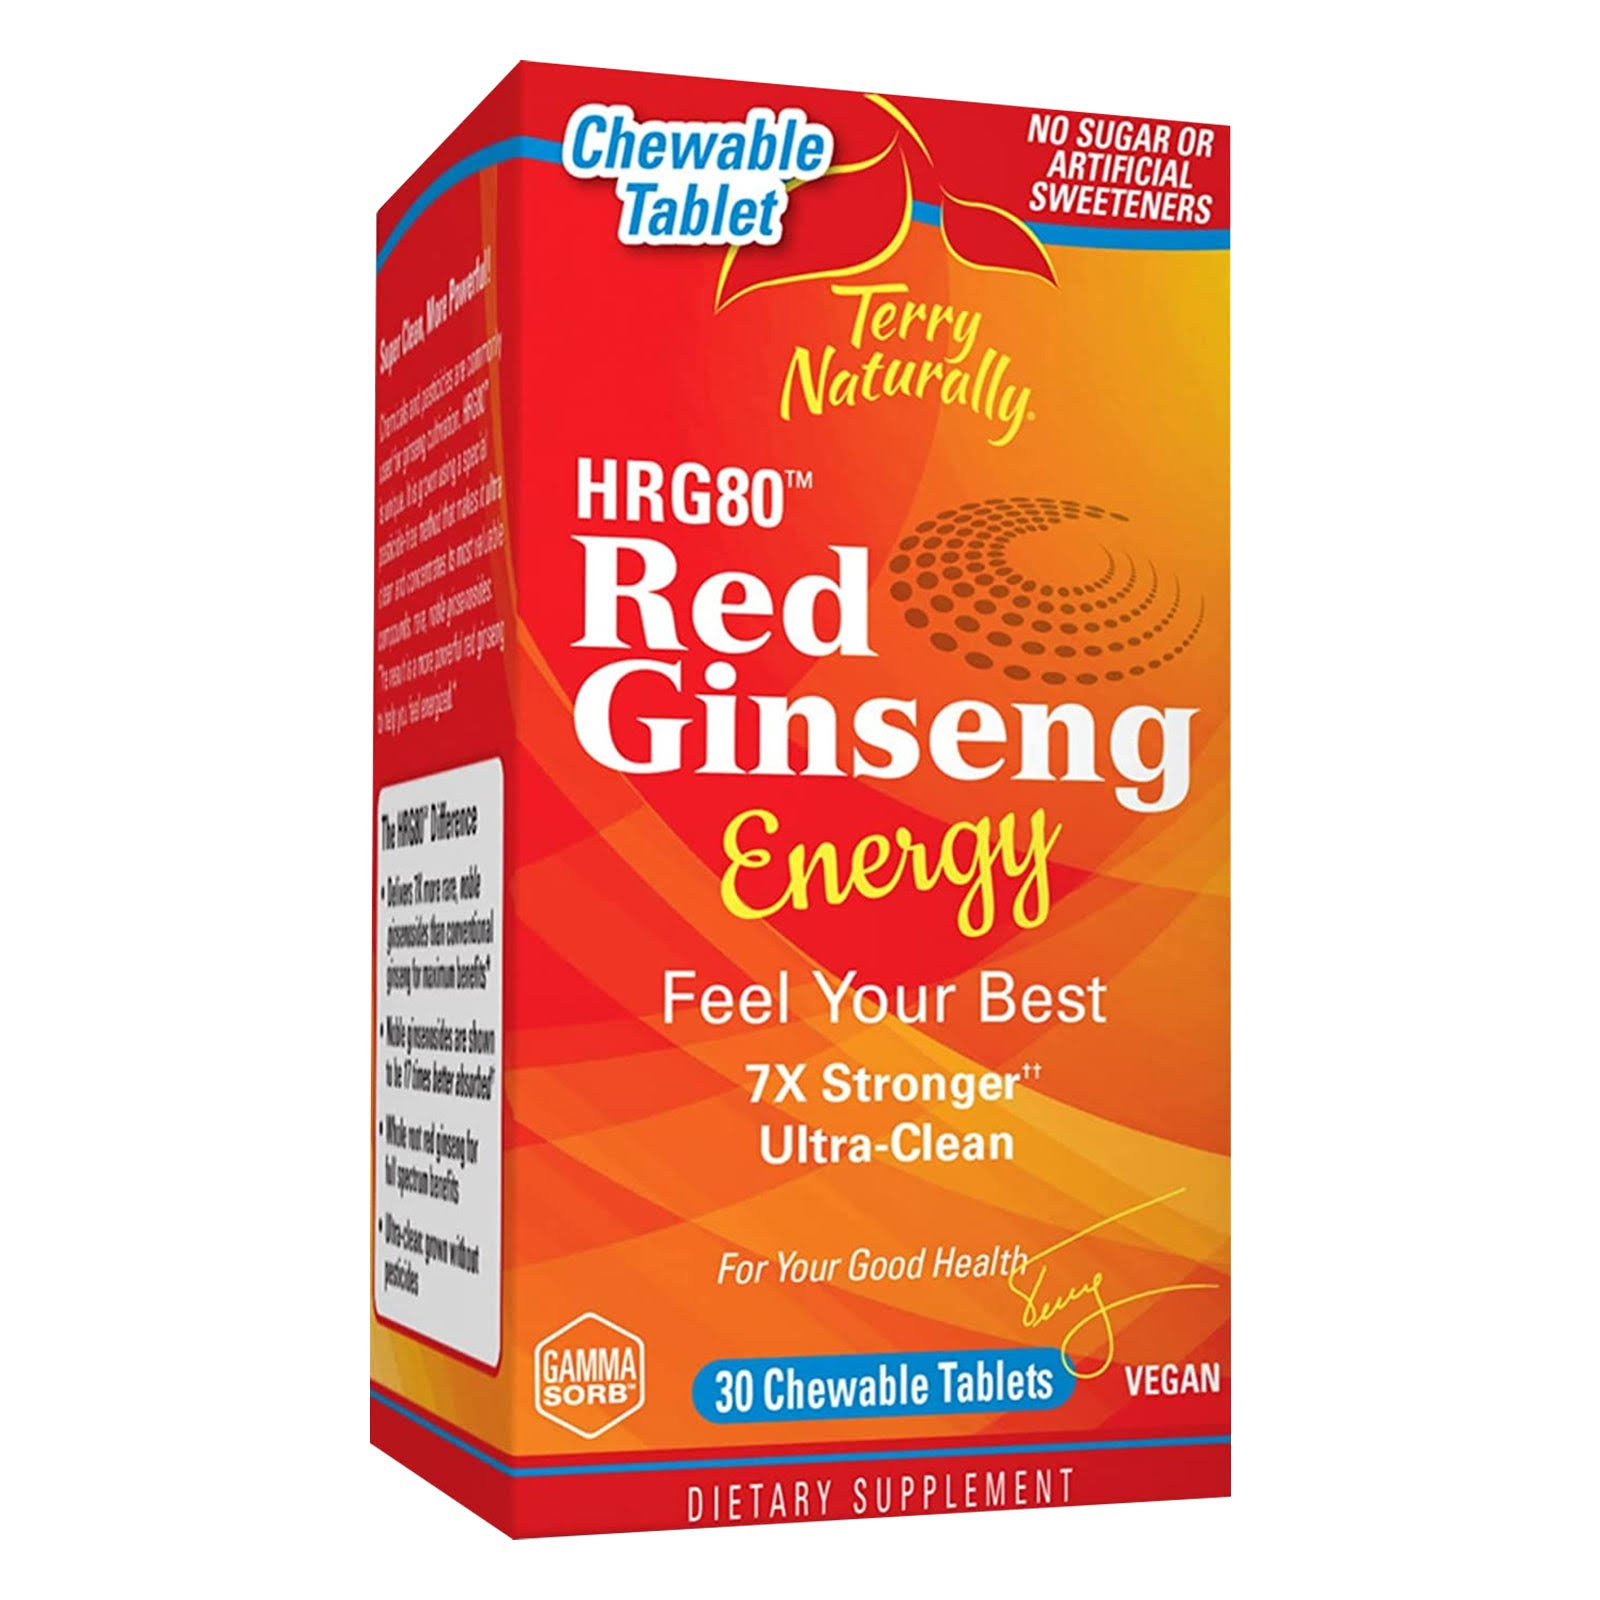 Terry Naturally, HRG80 Red Ginseng Energy, 30 Chewable Tablets